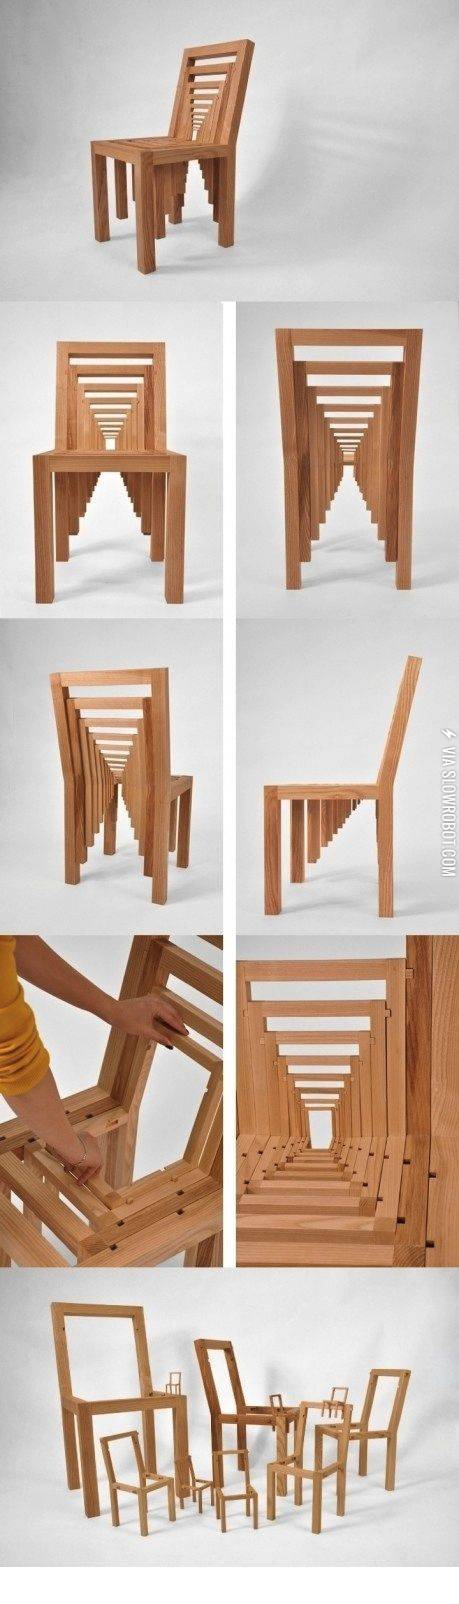 Inception+chair.